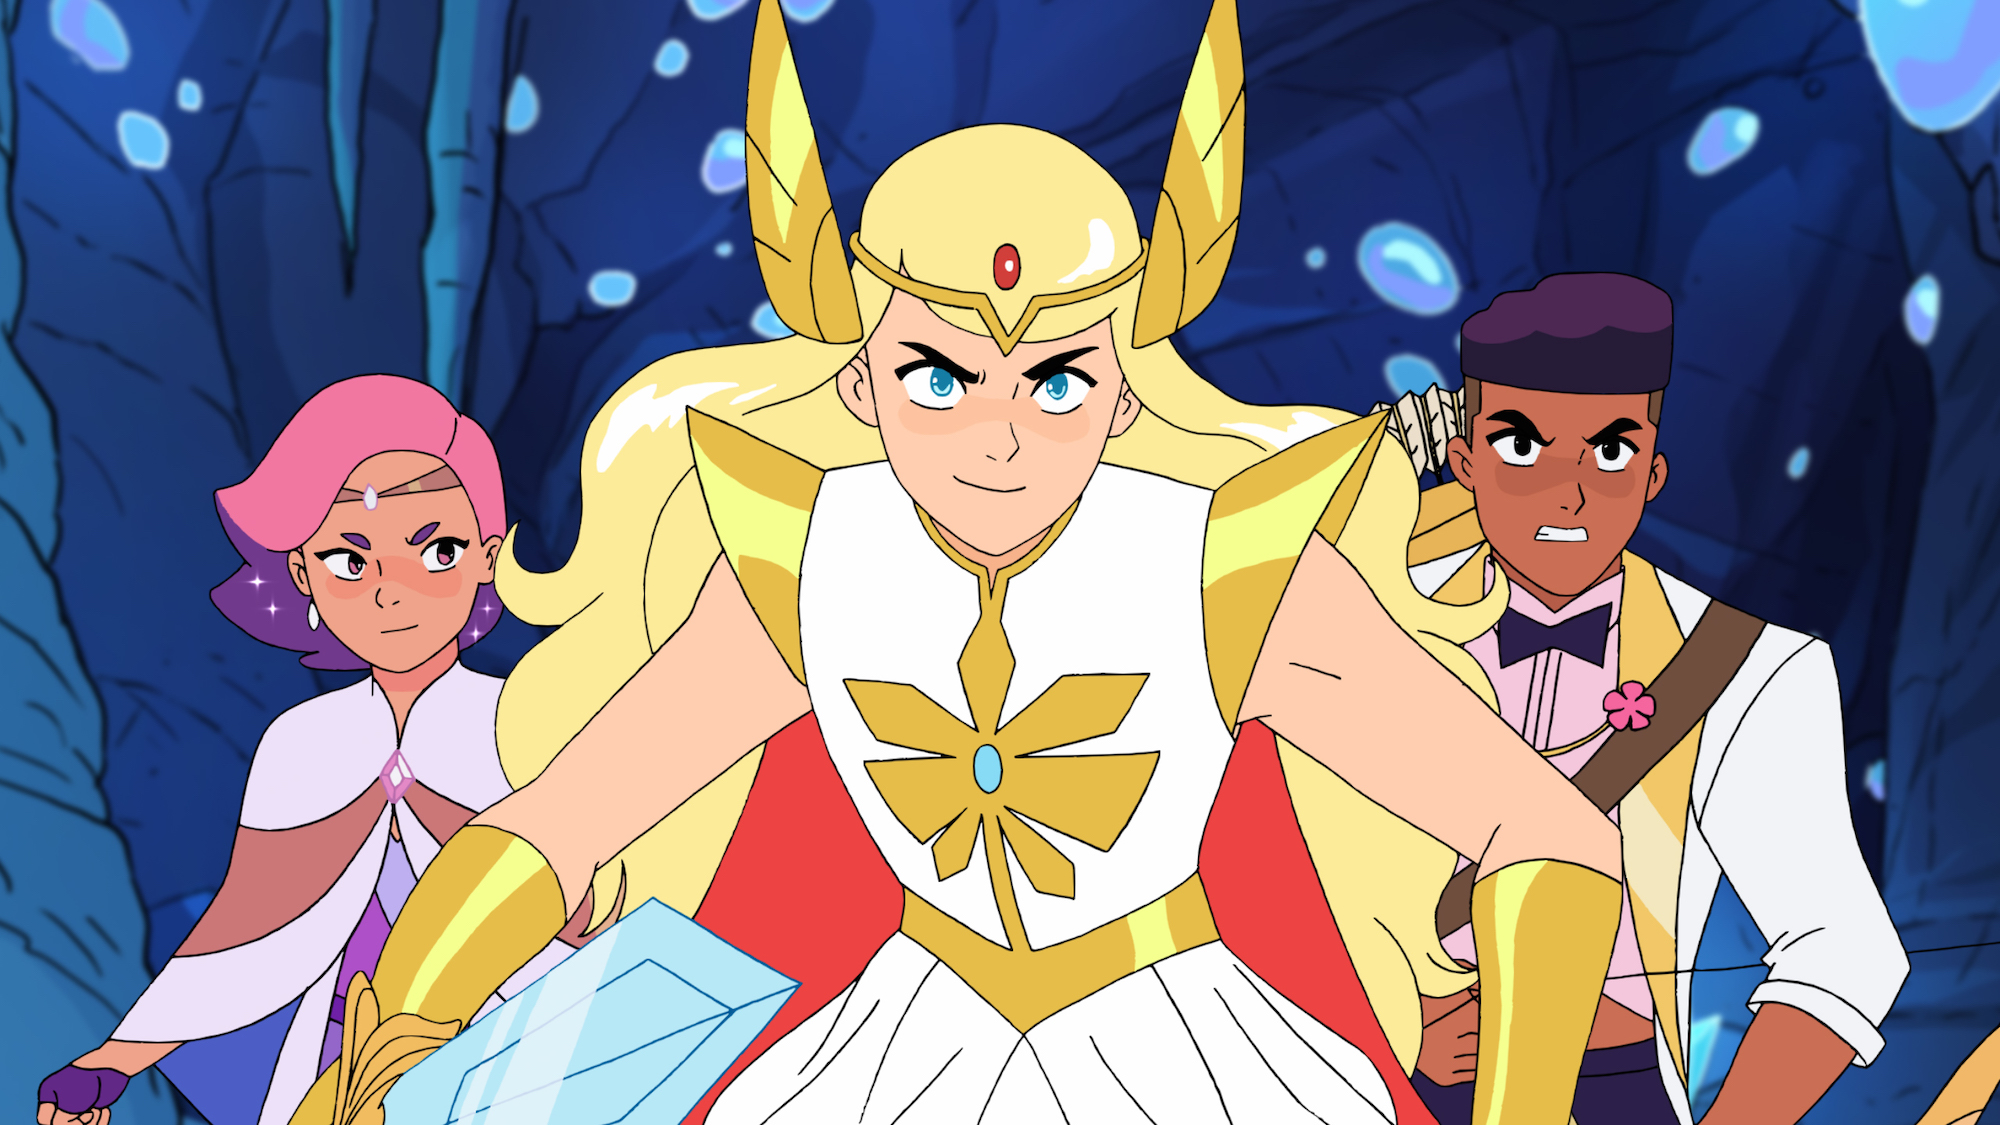 5 Reasons Fans of The 1980s ‘She-Ra’ Like The New Netflix Version, ‘She-Ra and the Princesses of Power’